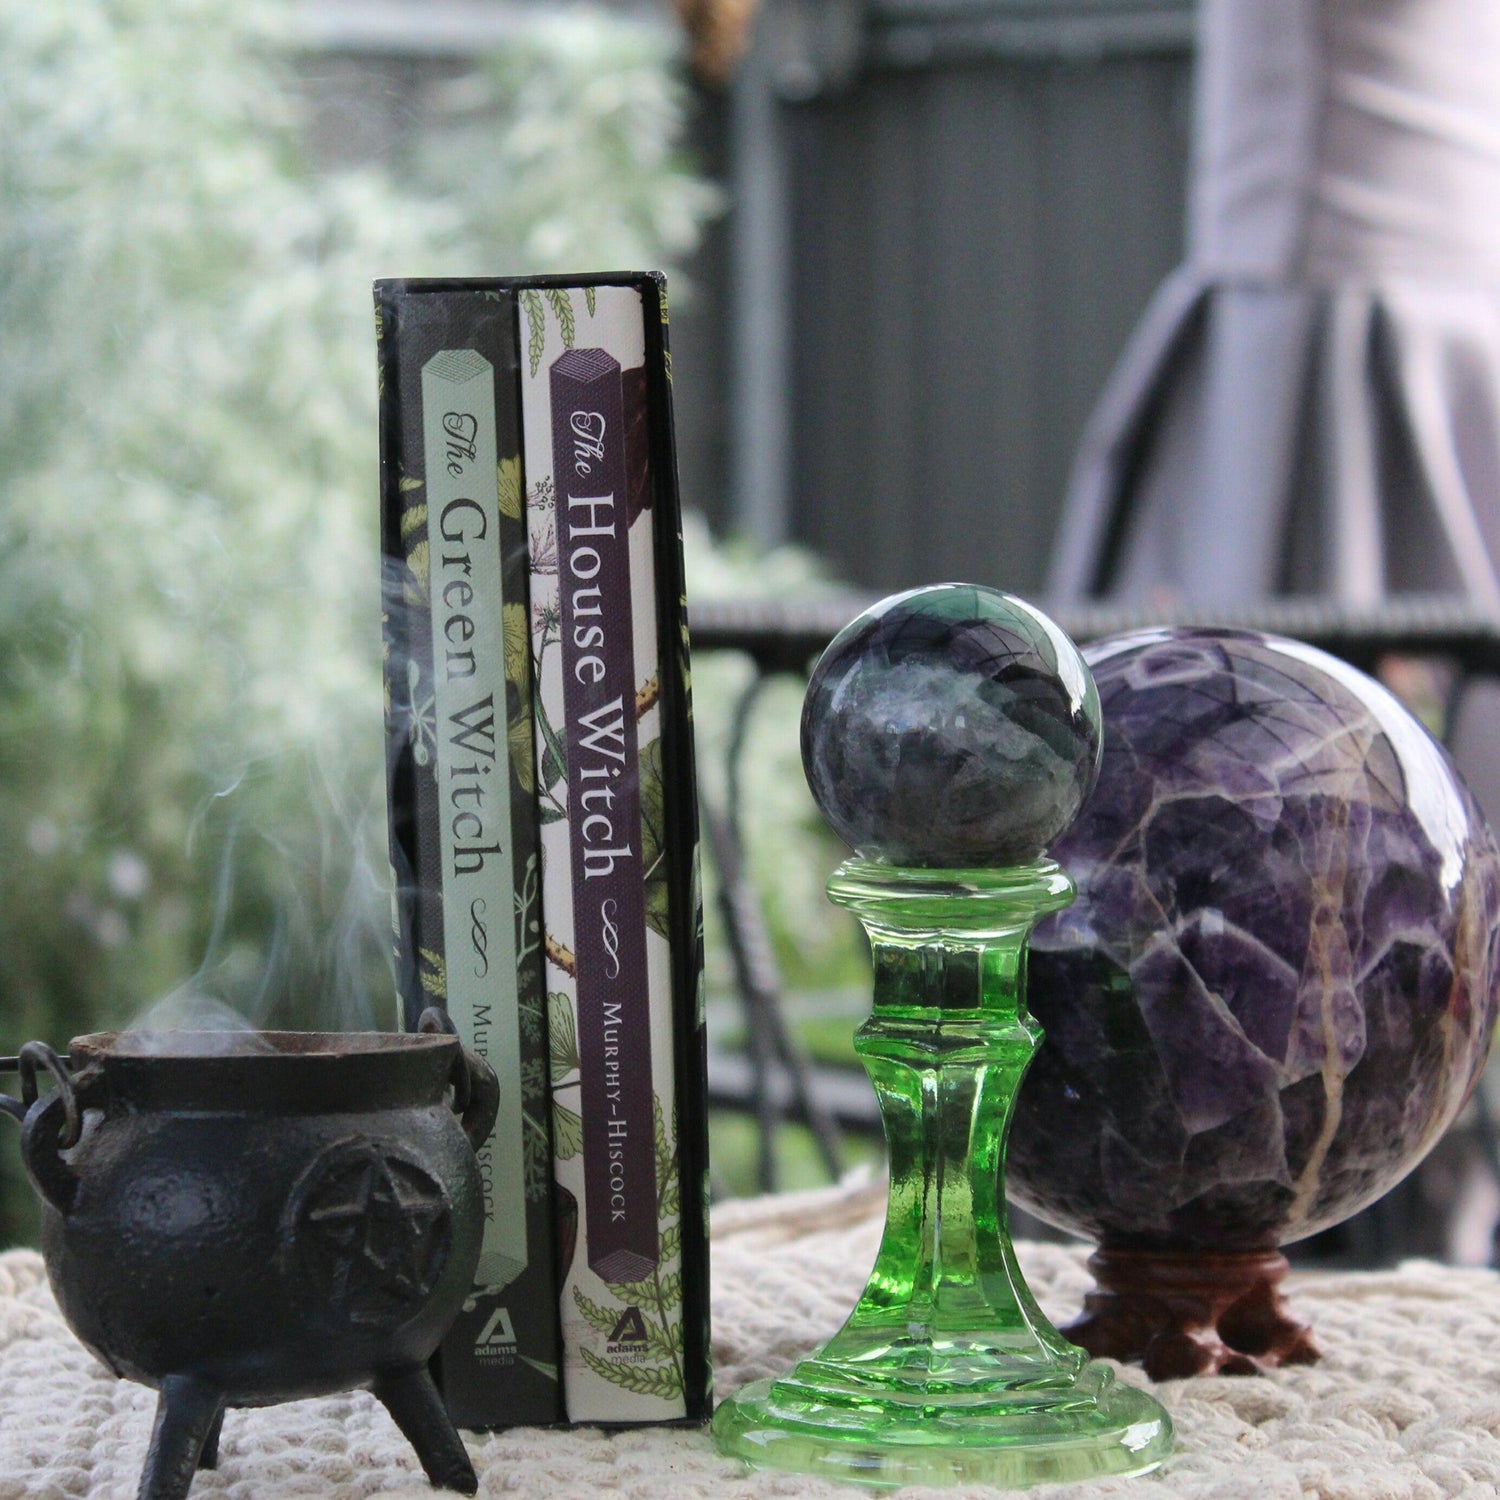 The Witchcraft Boxed Set
Featuring The Green Witch and The House Witch, By: Arin Murphy-Hiscock - JOURNEY artisan soaps & candles